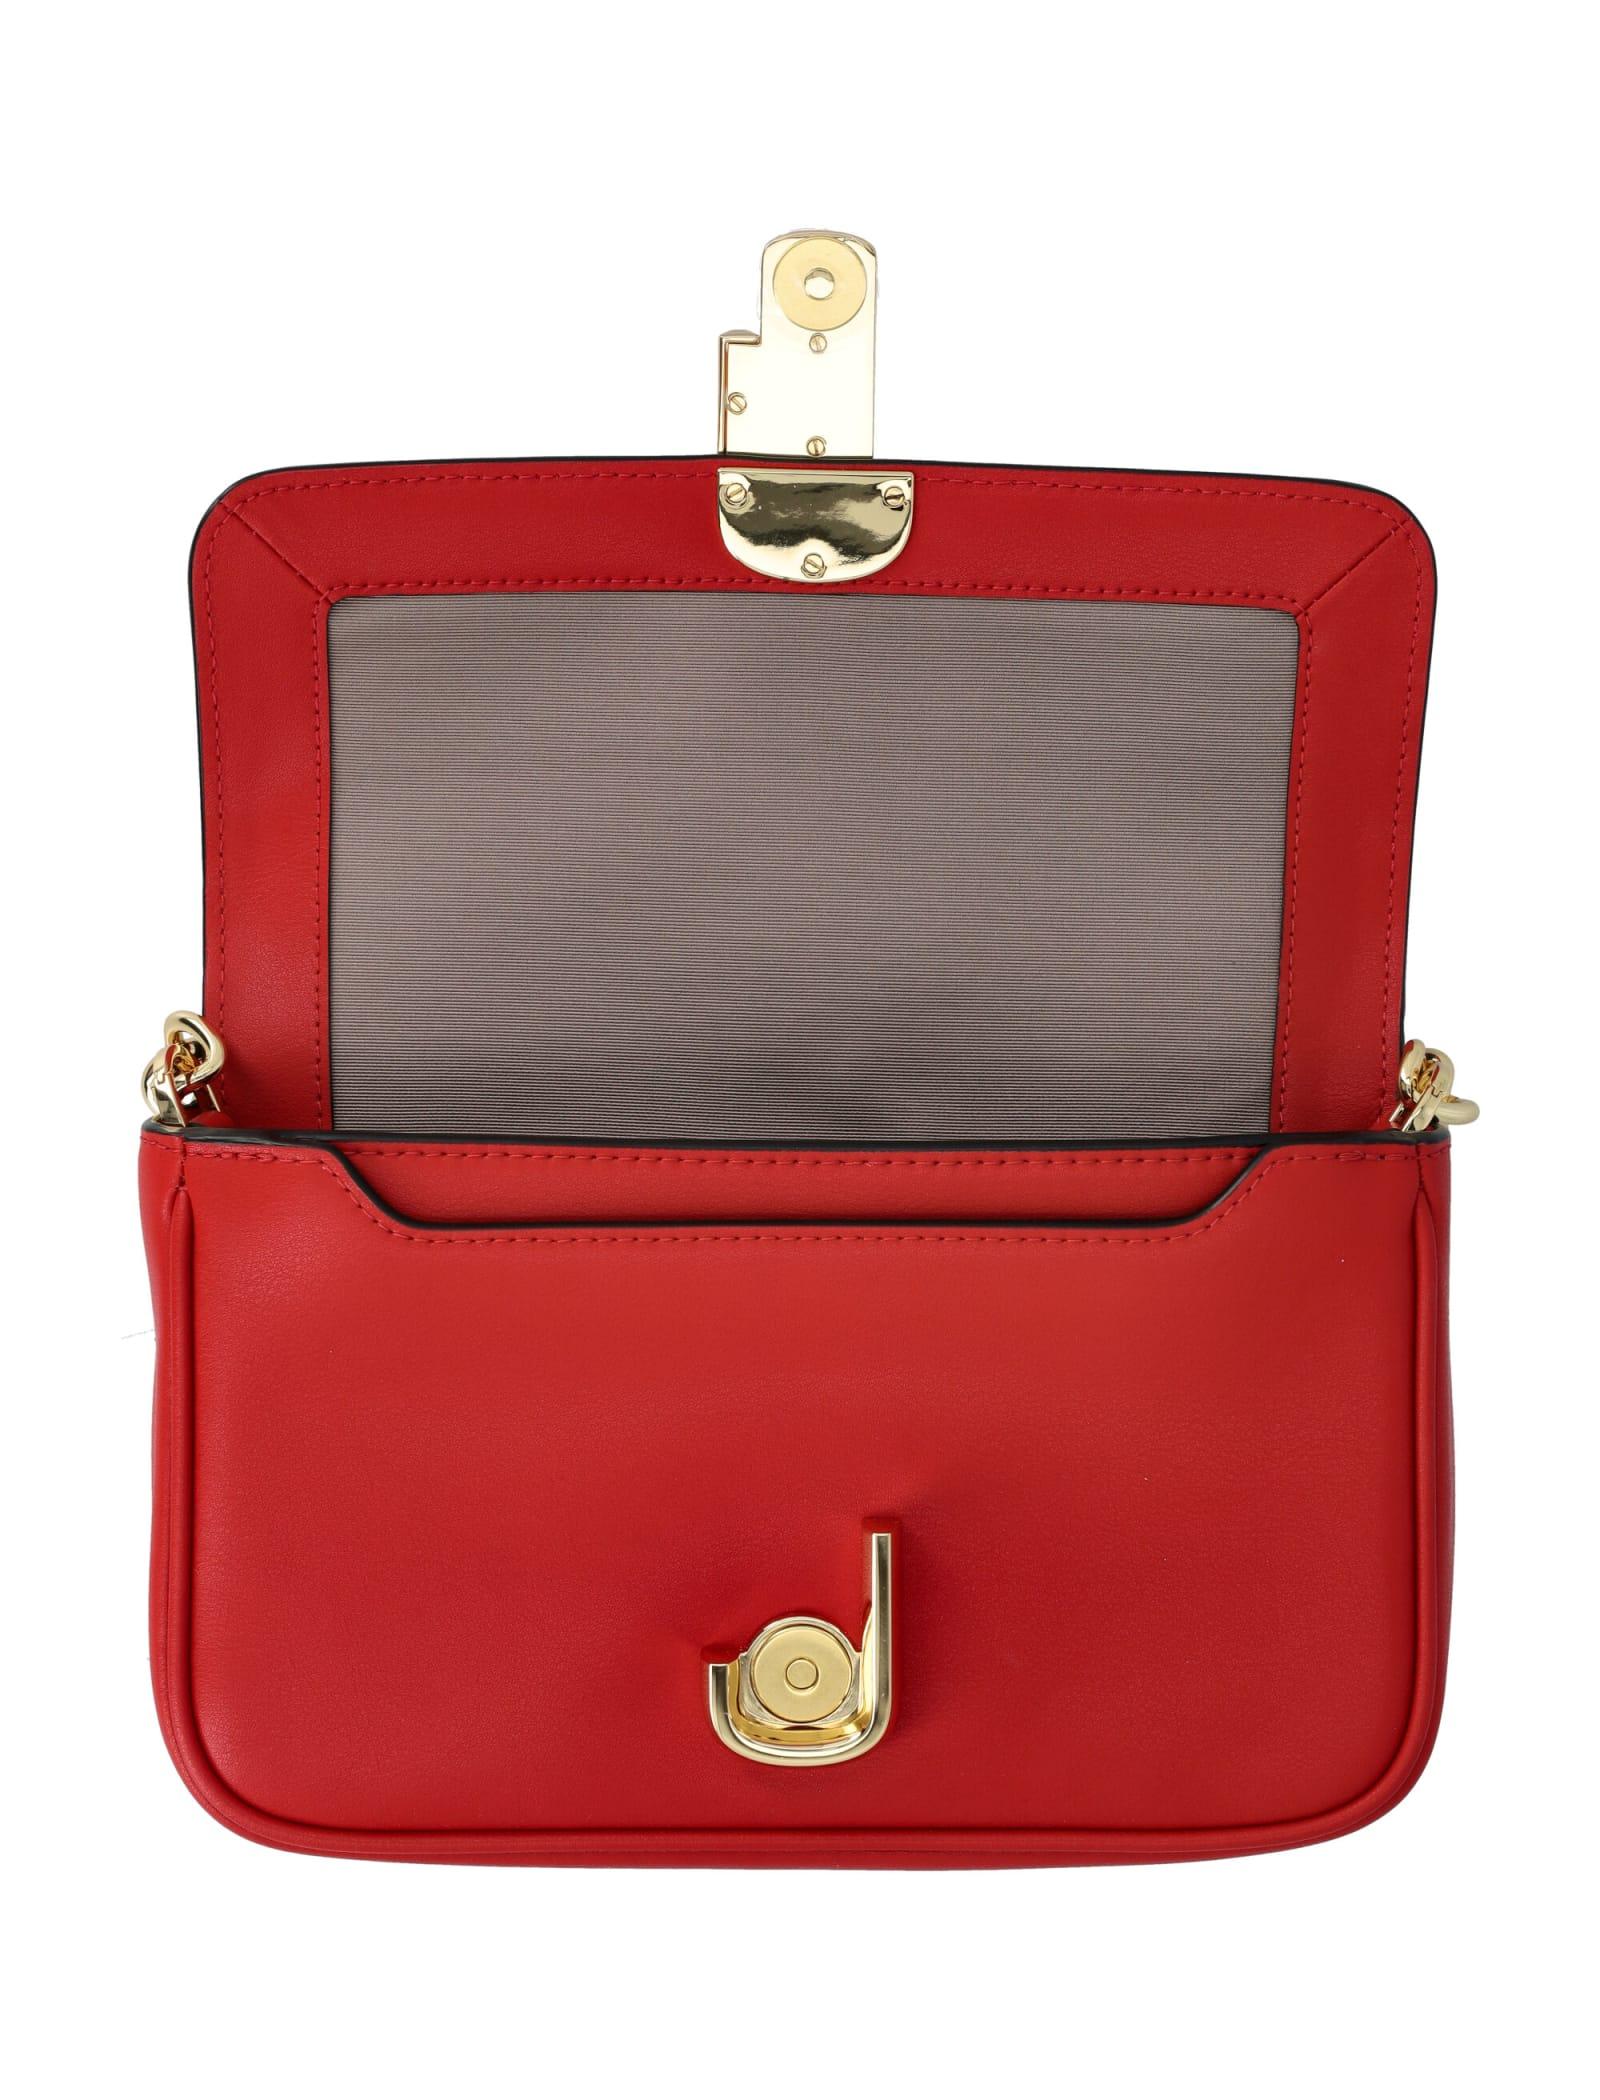 Marc Jacobs J Leather Bag in Red |